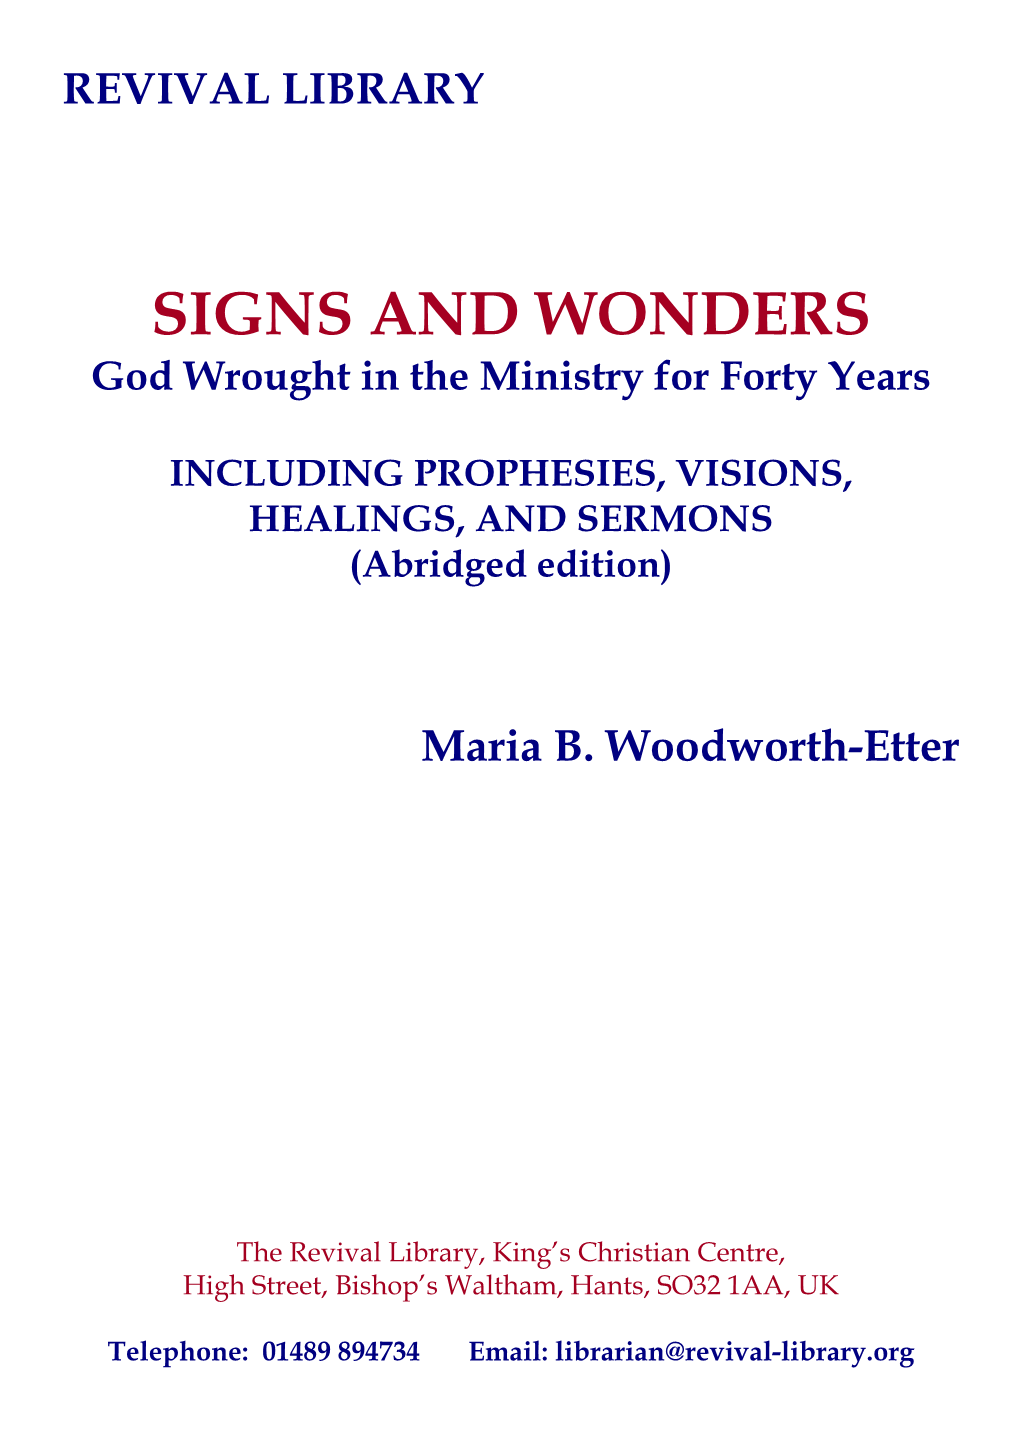 SIGNS and WONDERS God Wrought in the Ministry for Forty Years